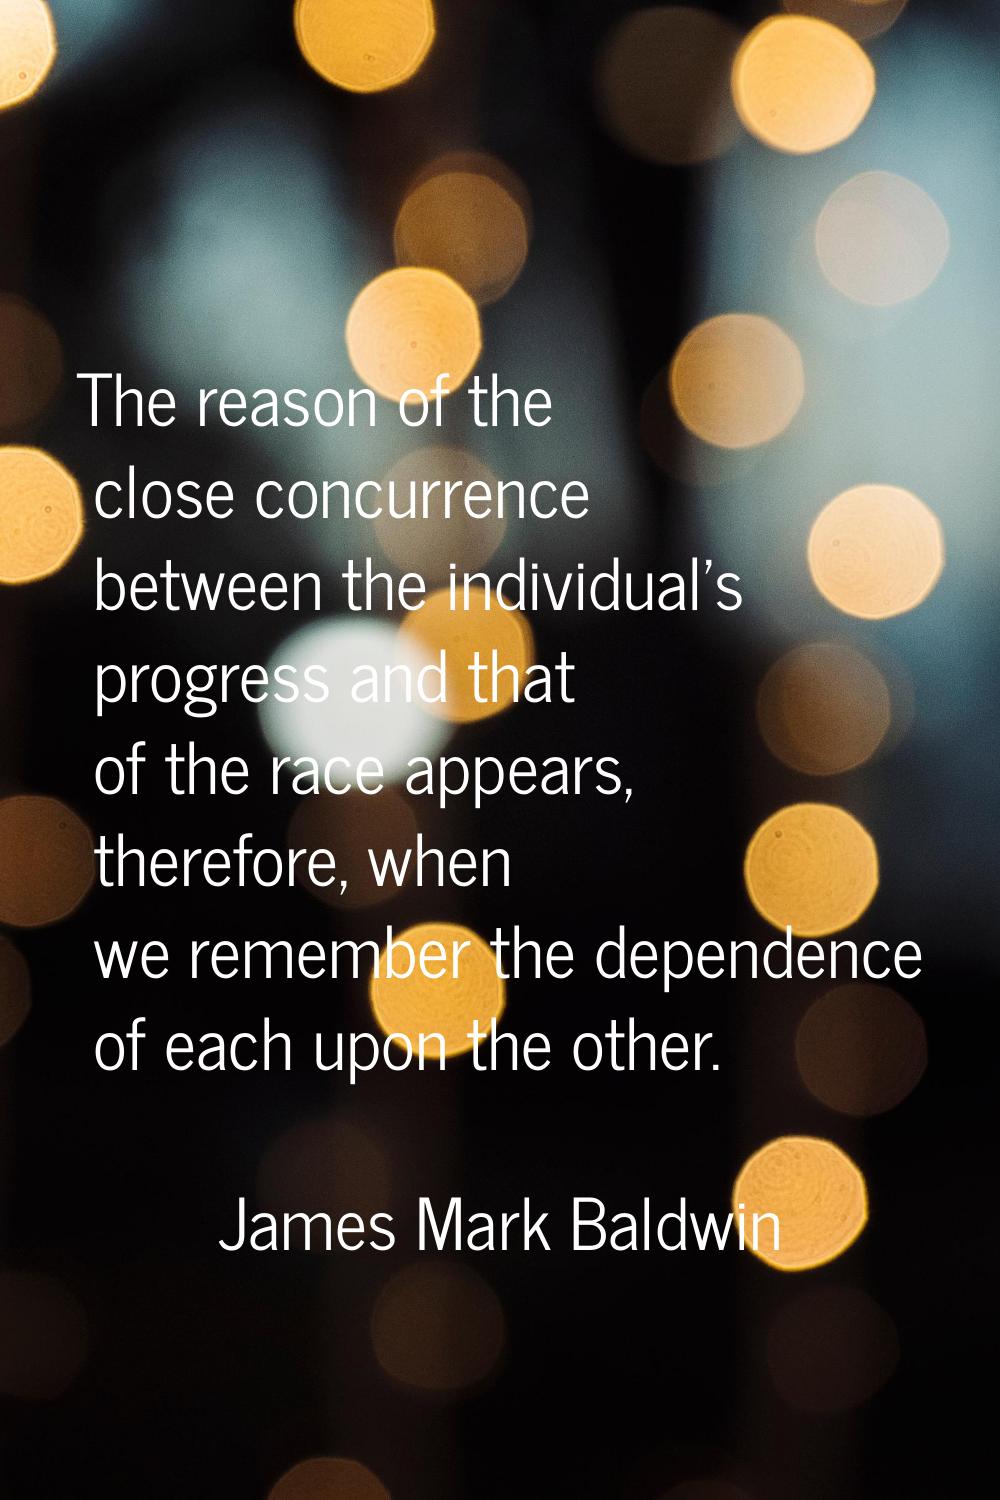 The reason of the close concurrence between the individual's progress and that of the race appears,